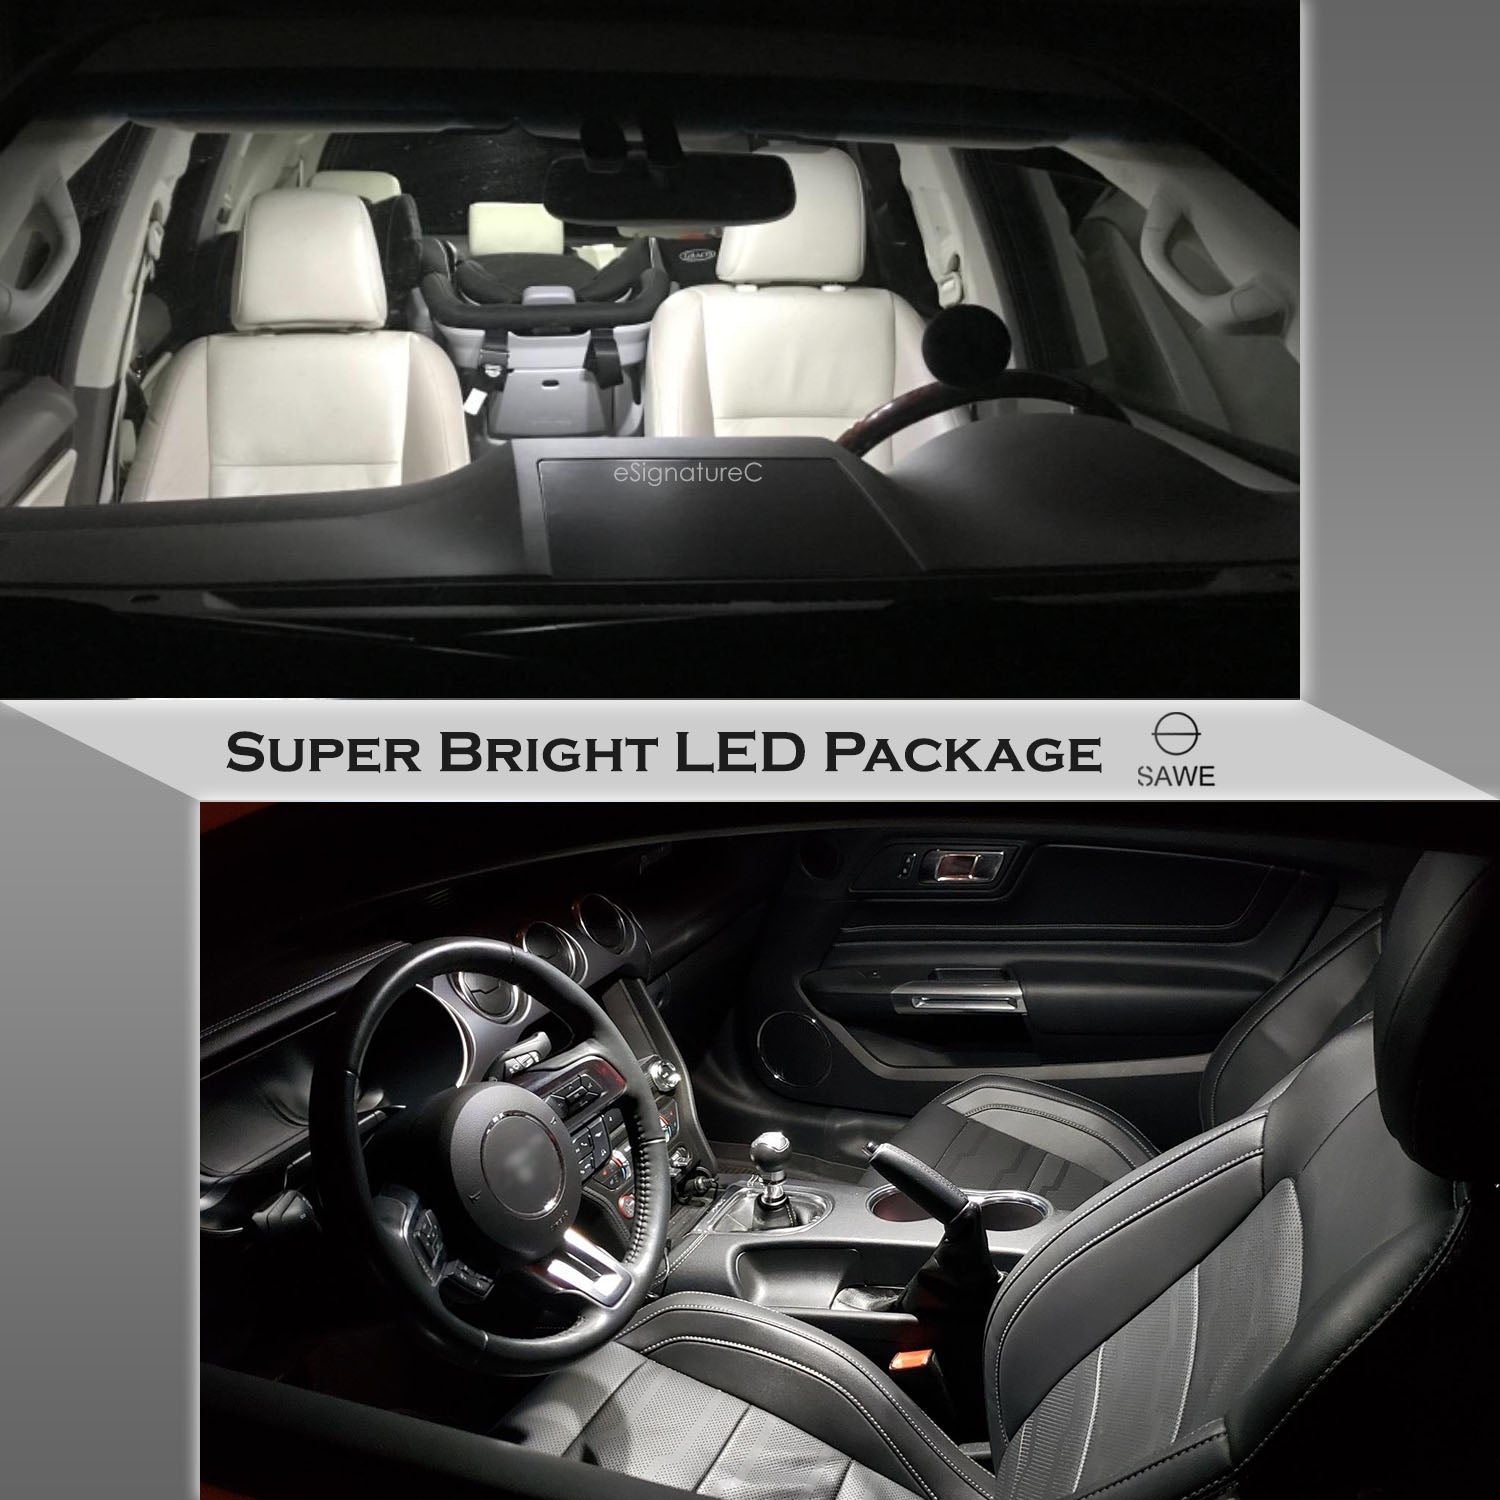 For Cadillac CTS Interior LED Lights - Dome & Map Light Bulbs Package Kit for 2003 - 2007 - White